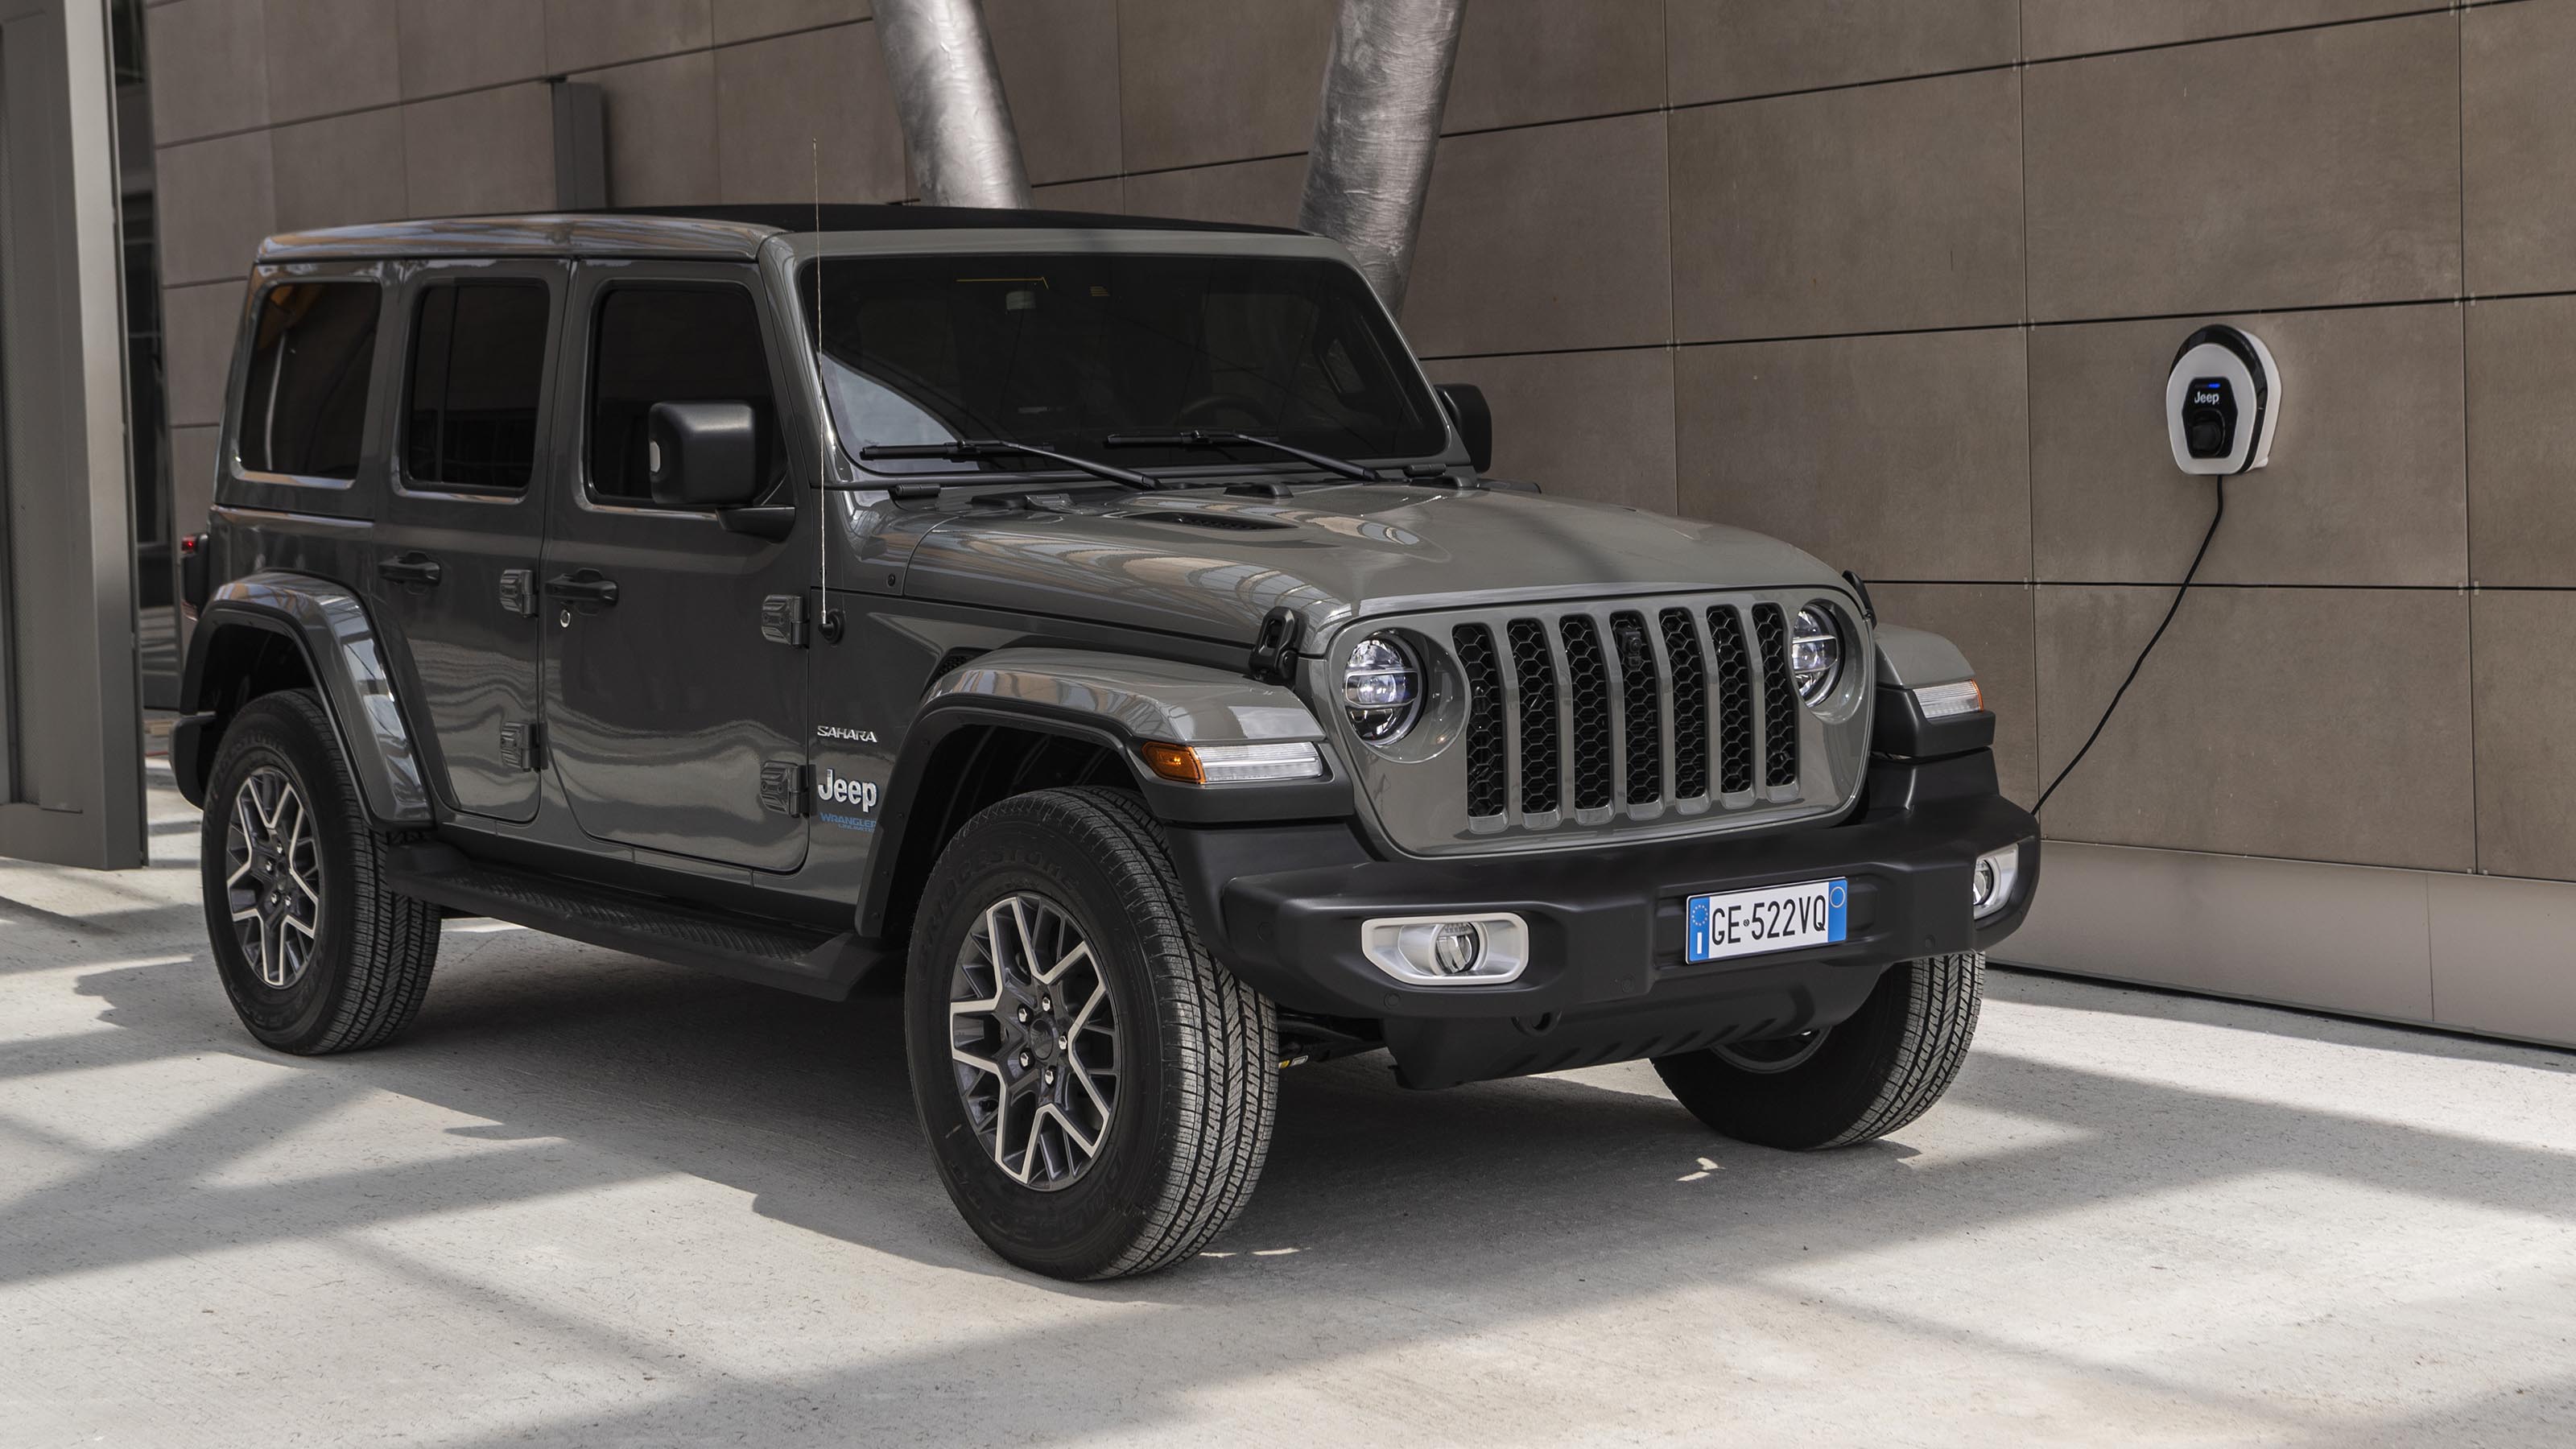 Jeep Wrangler 4xe plug-in hybrid: pictures, specs and details |  DrivingElectric